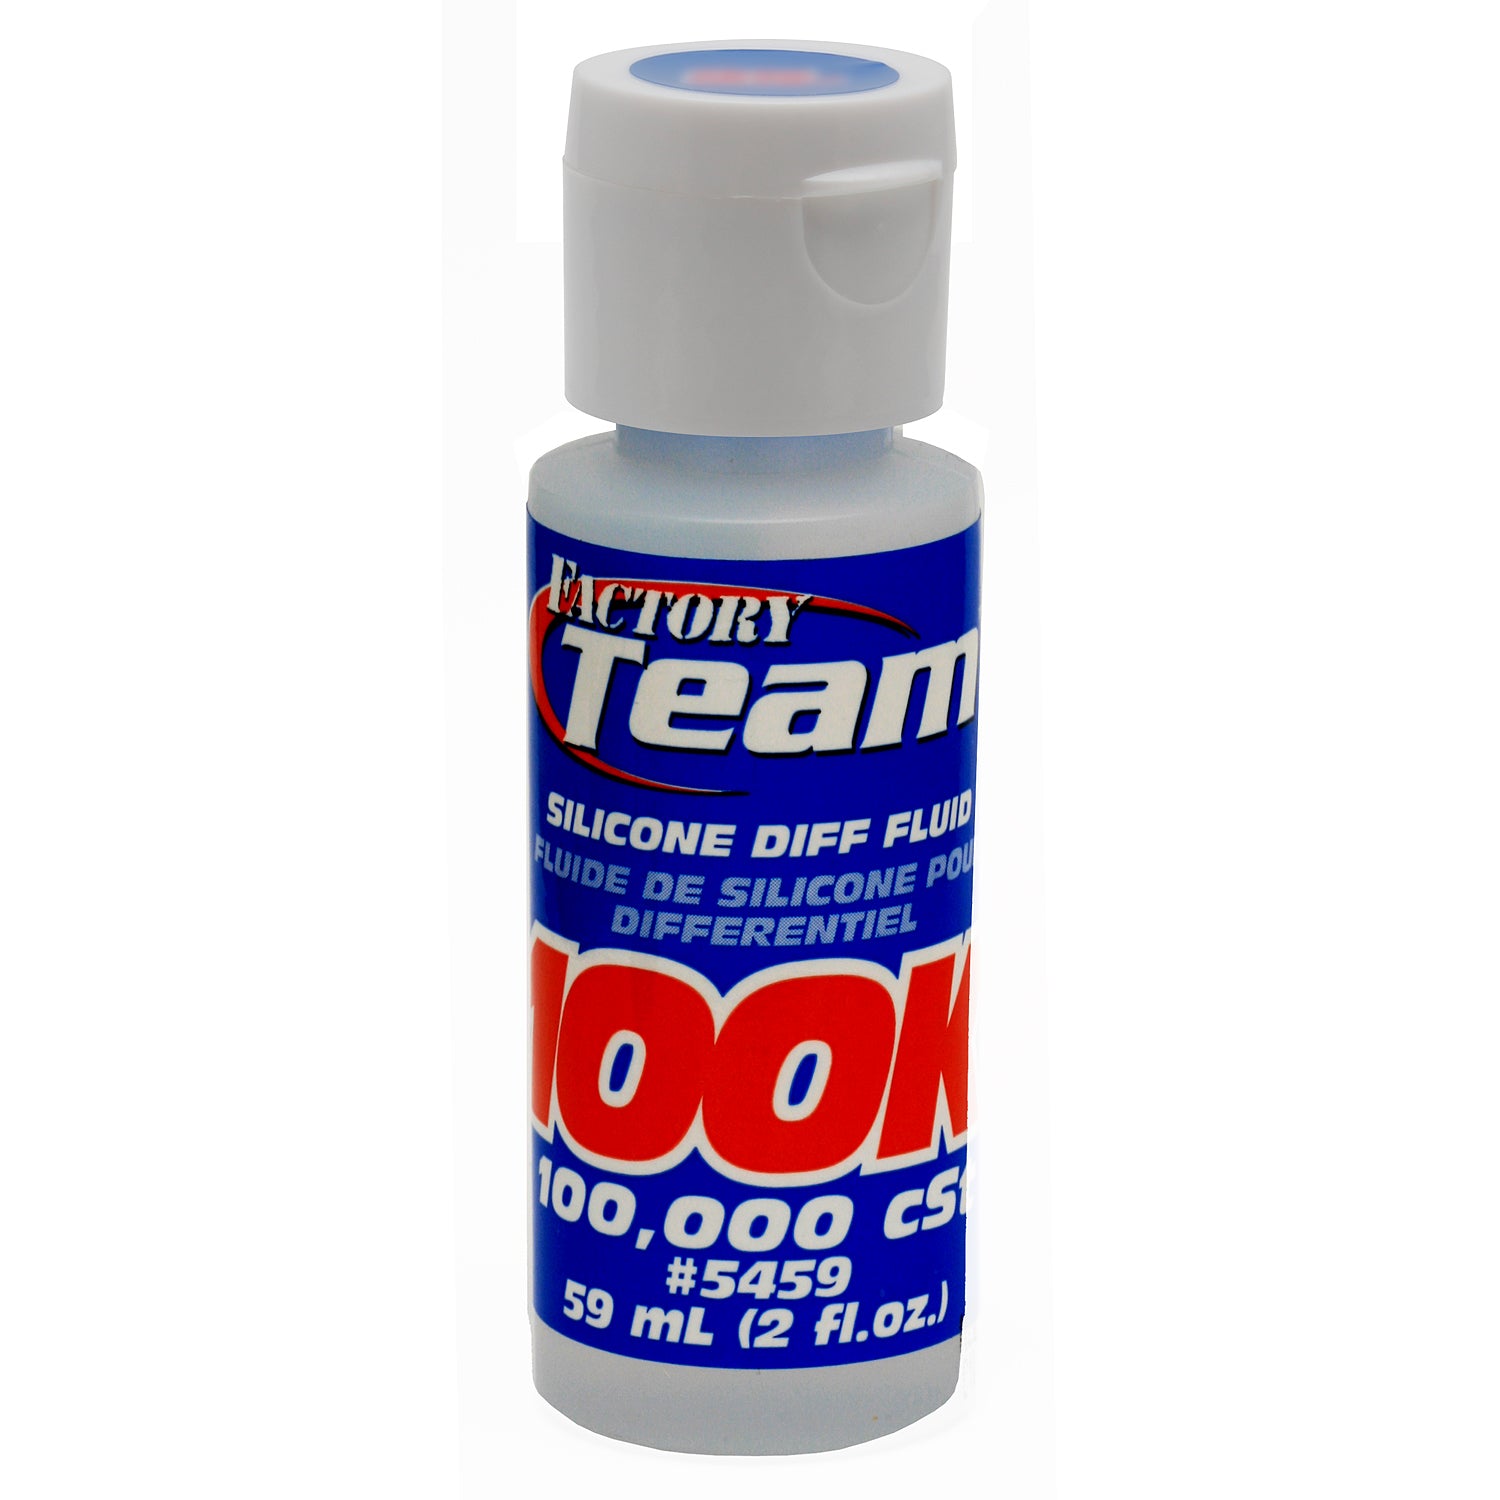 ASSOCIATED 5459 Silicone Diff Fluid 100000